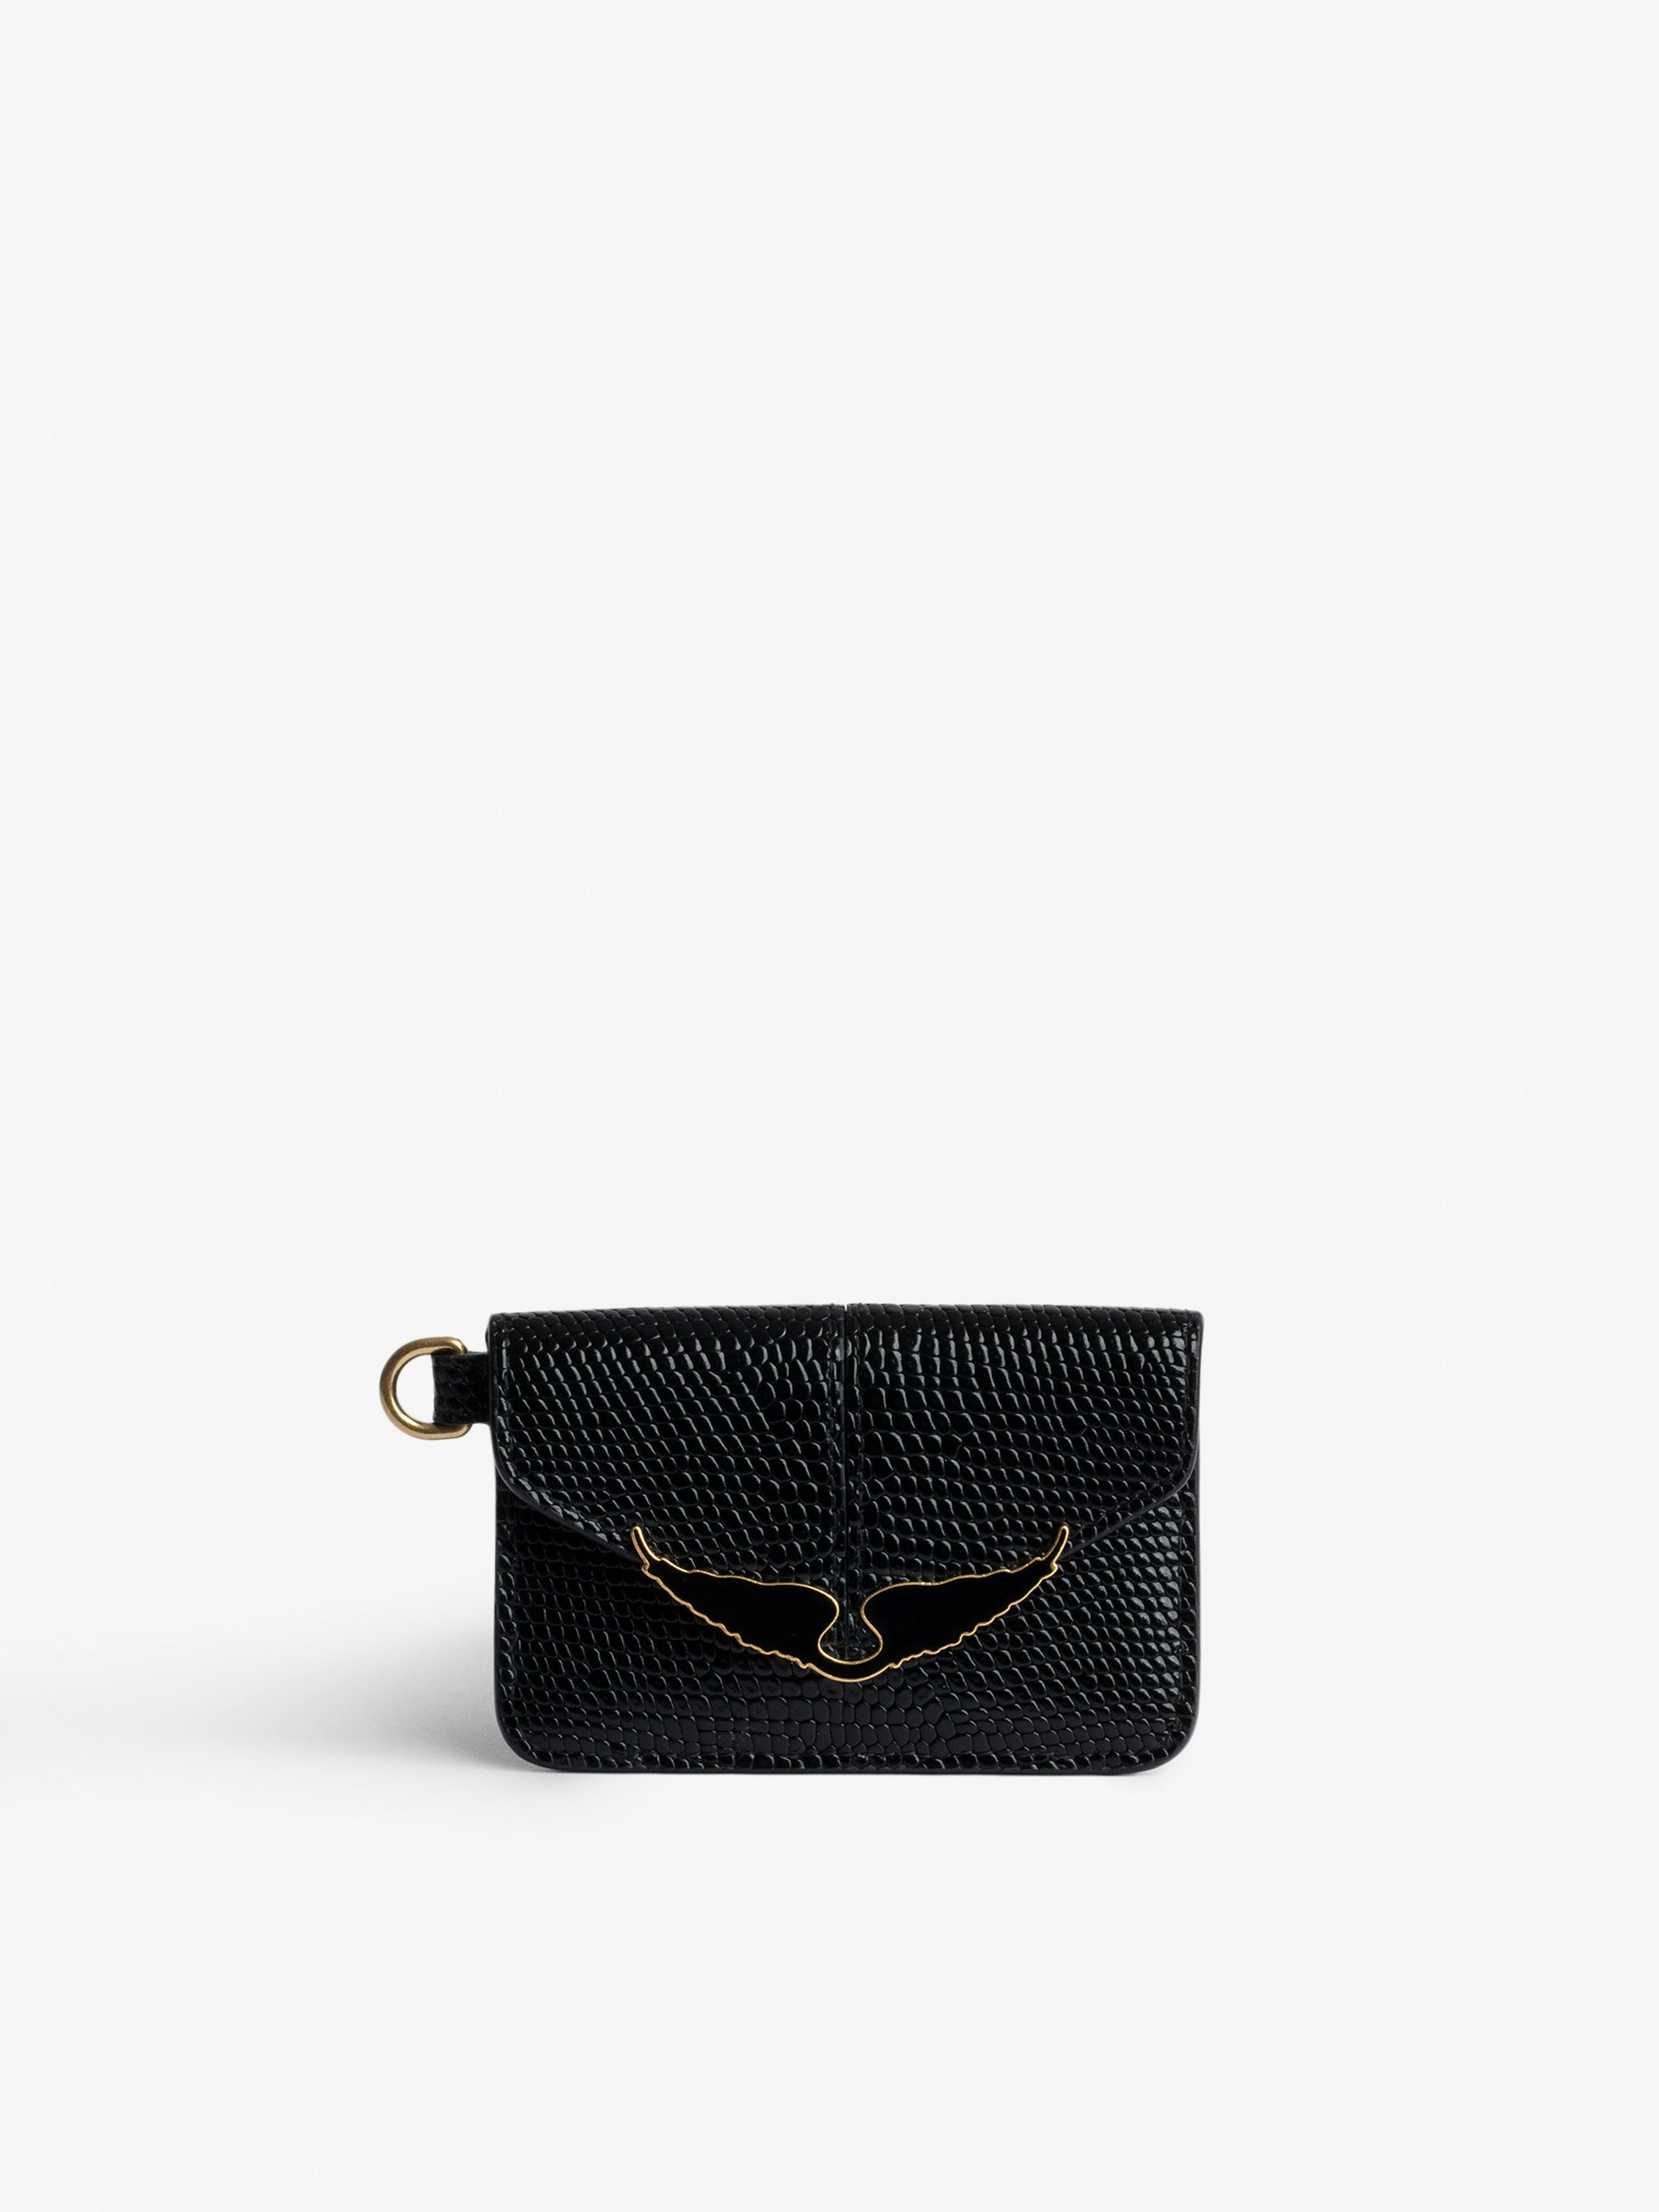 Borderline Pass Card Case - Women’s card case in shiny black leather with embossed iguana and black lacquered wings on the clasp